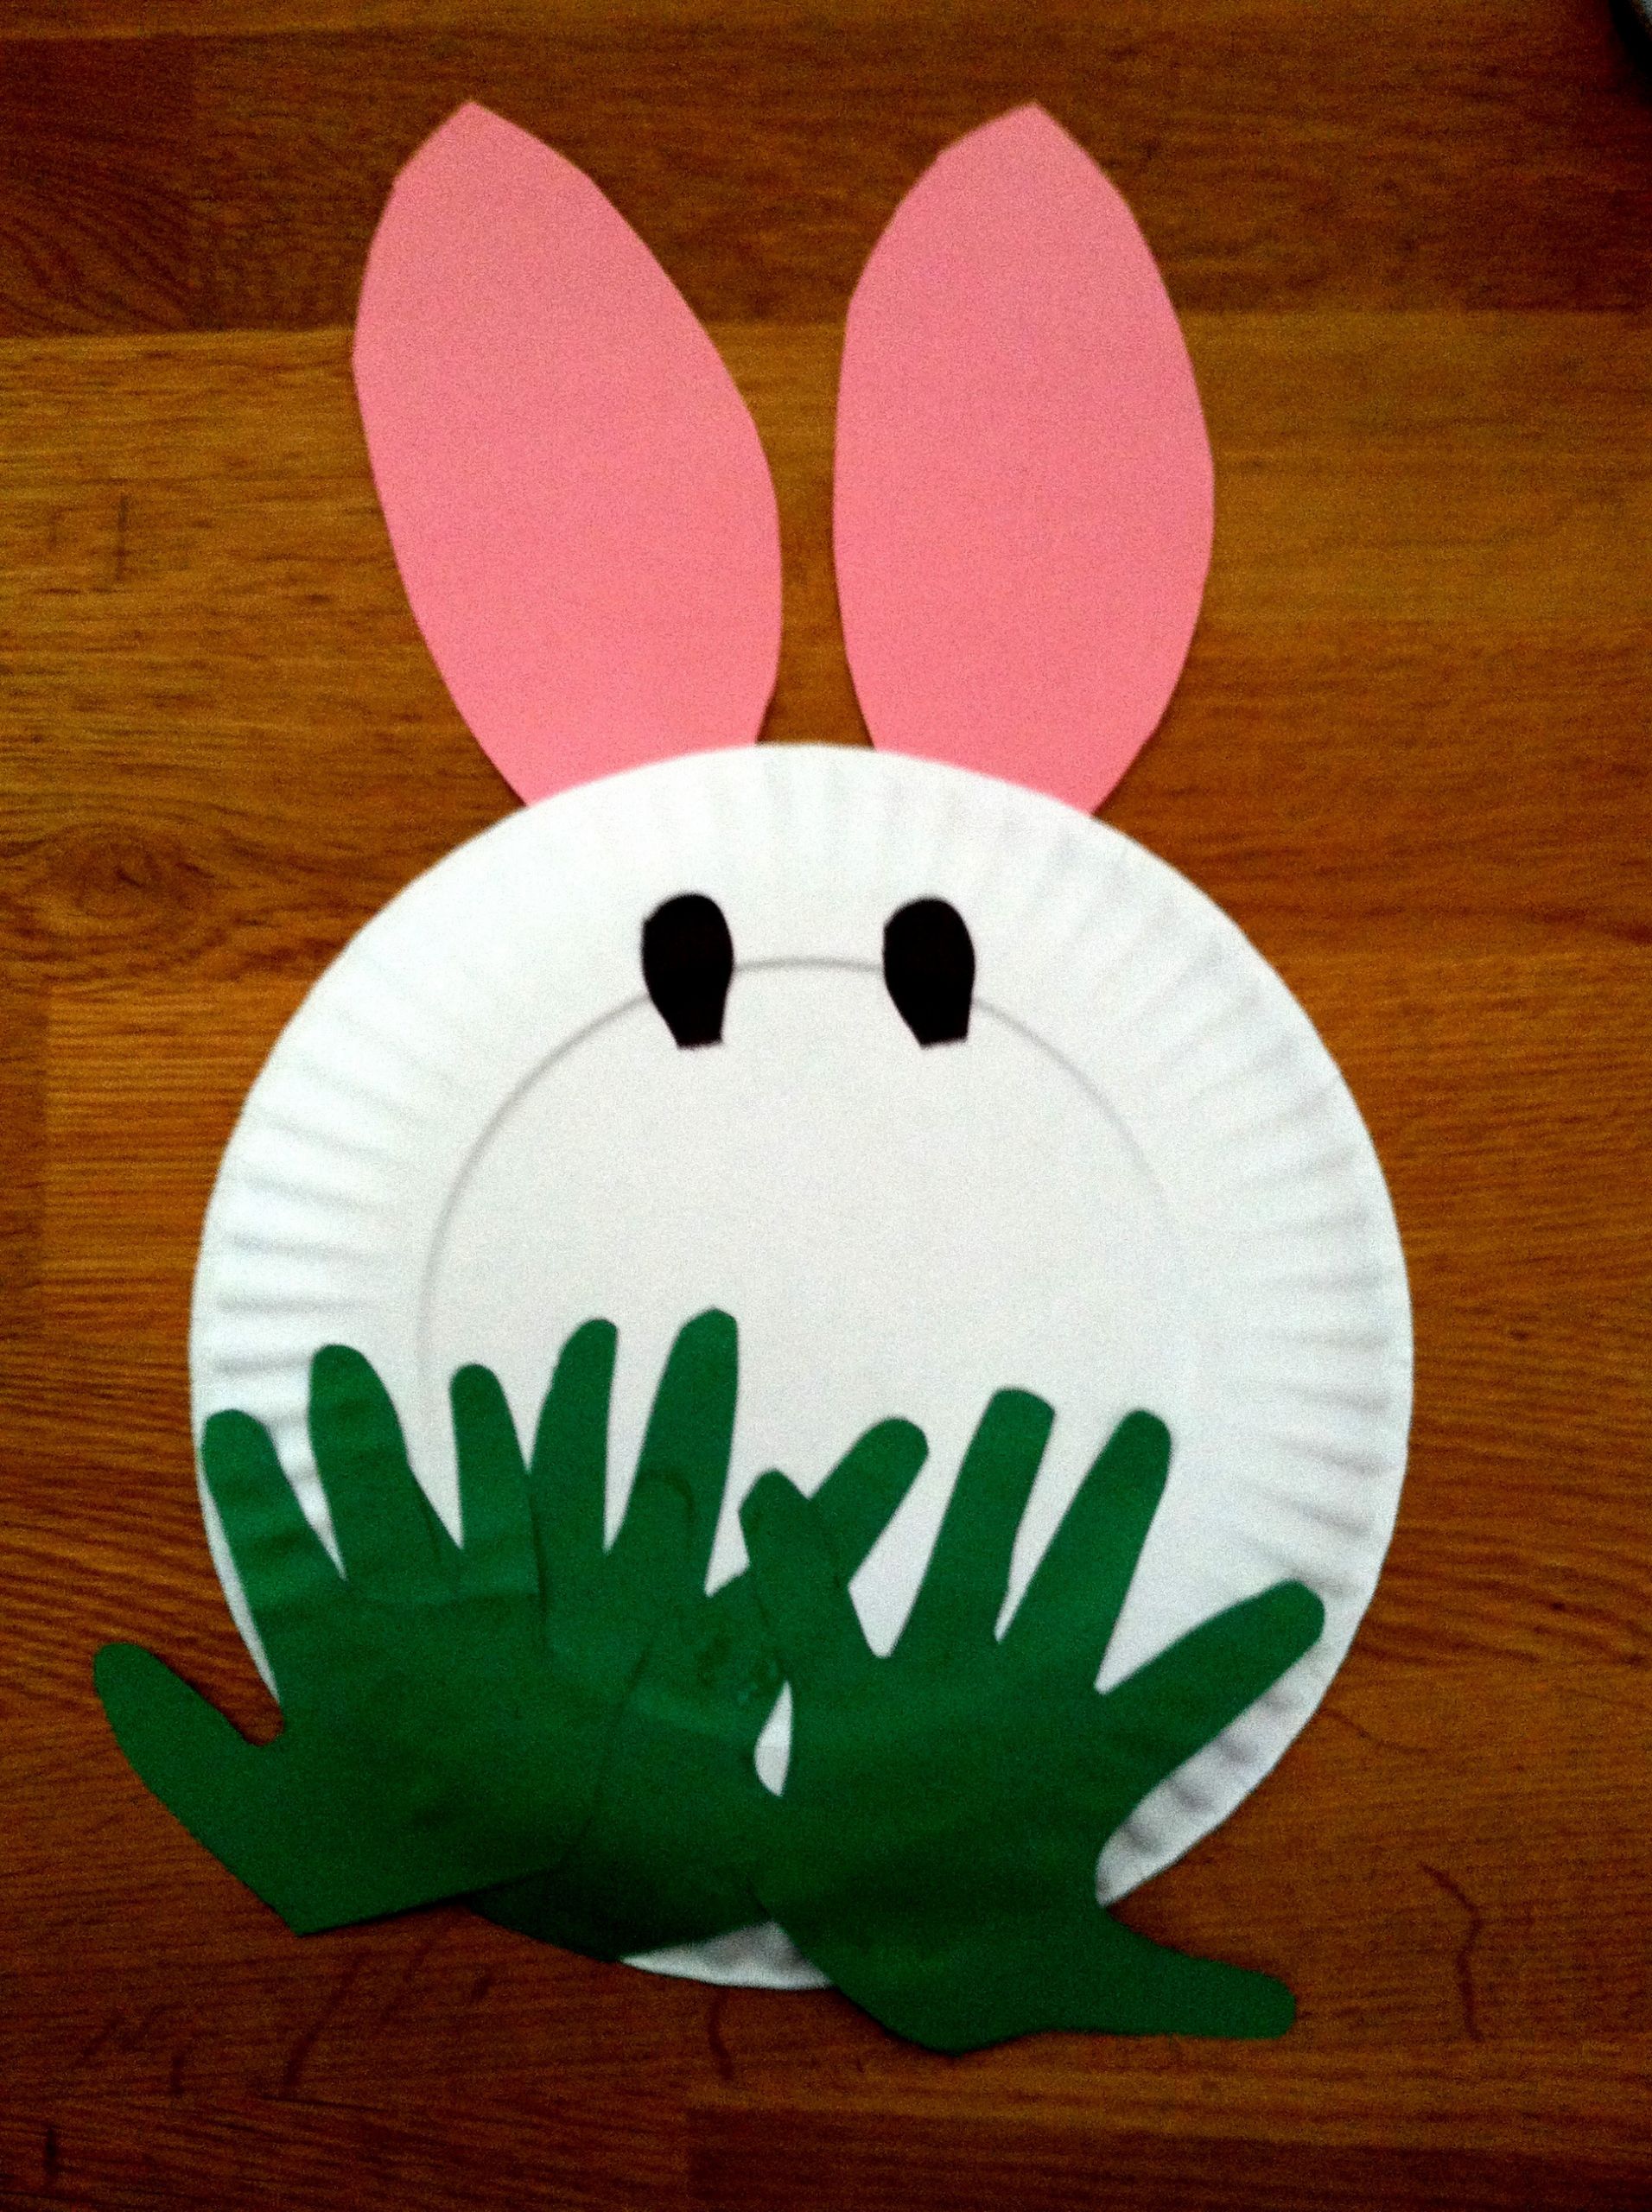 Kindergarten Easter Crafts
 Peeking Bunny Easter Craft SUPER MOMMY TO THE RESCUE